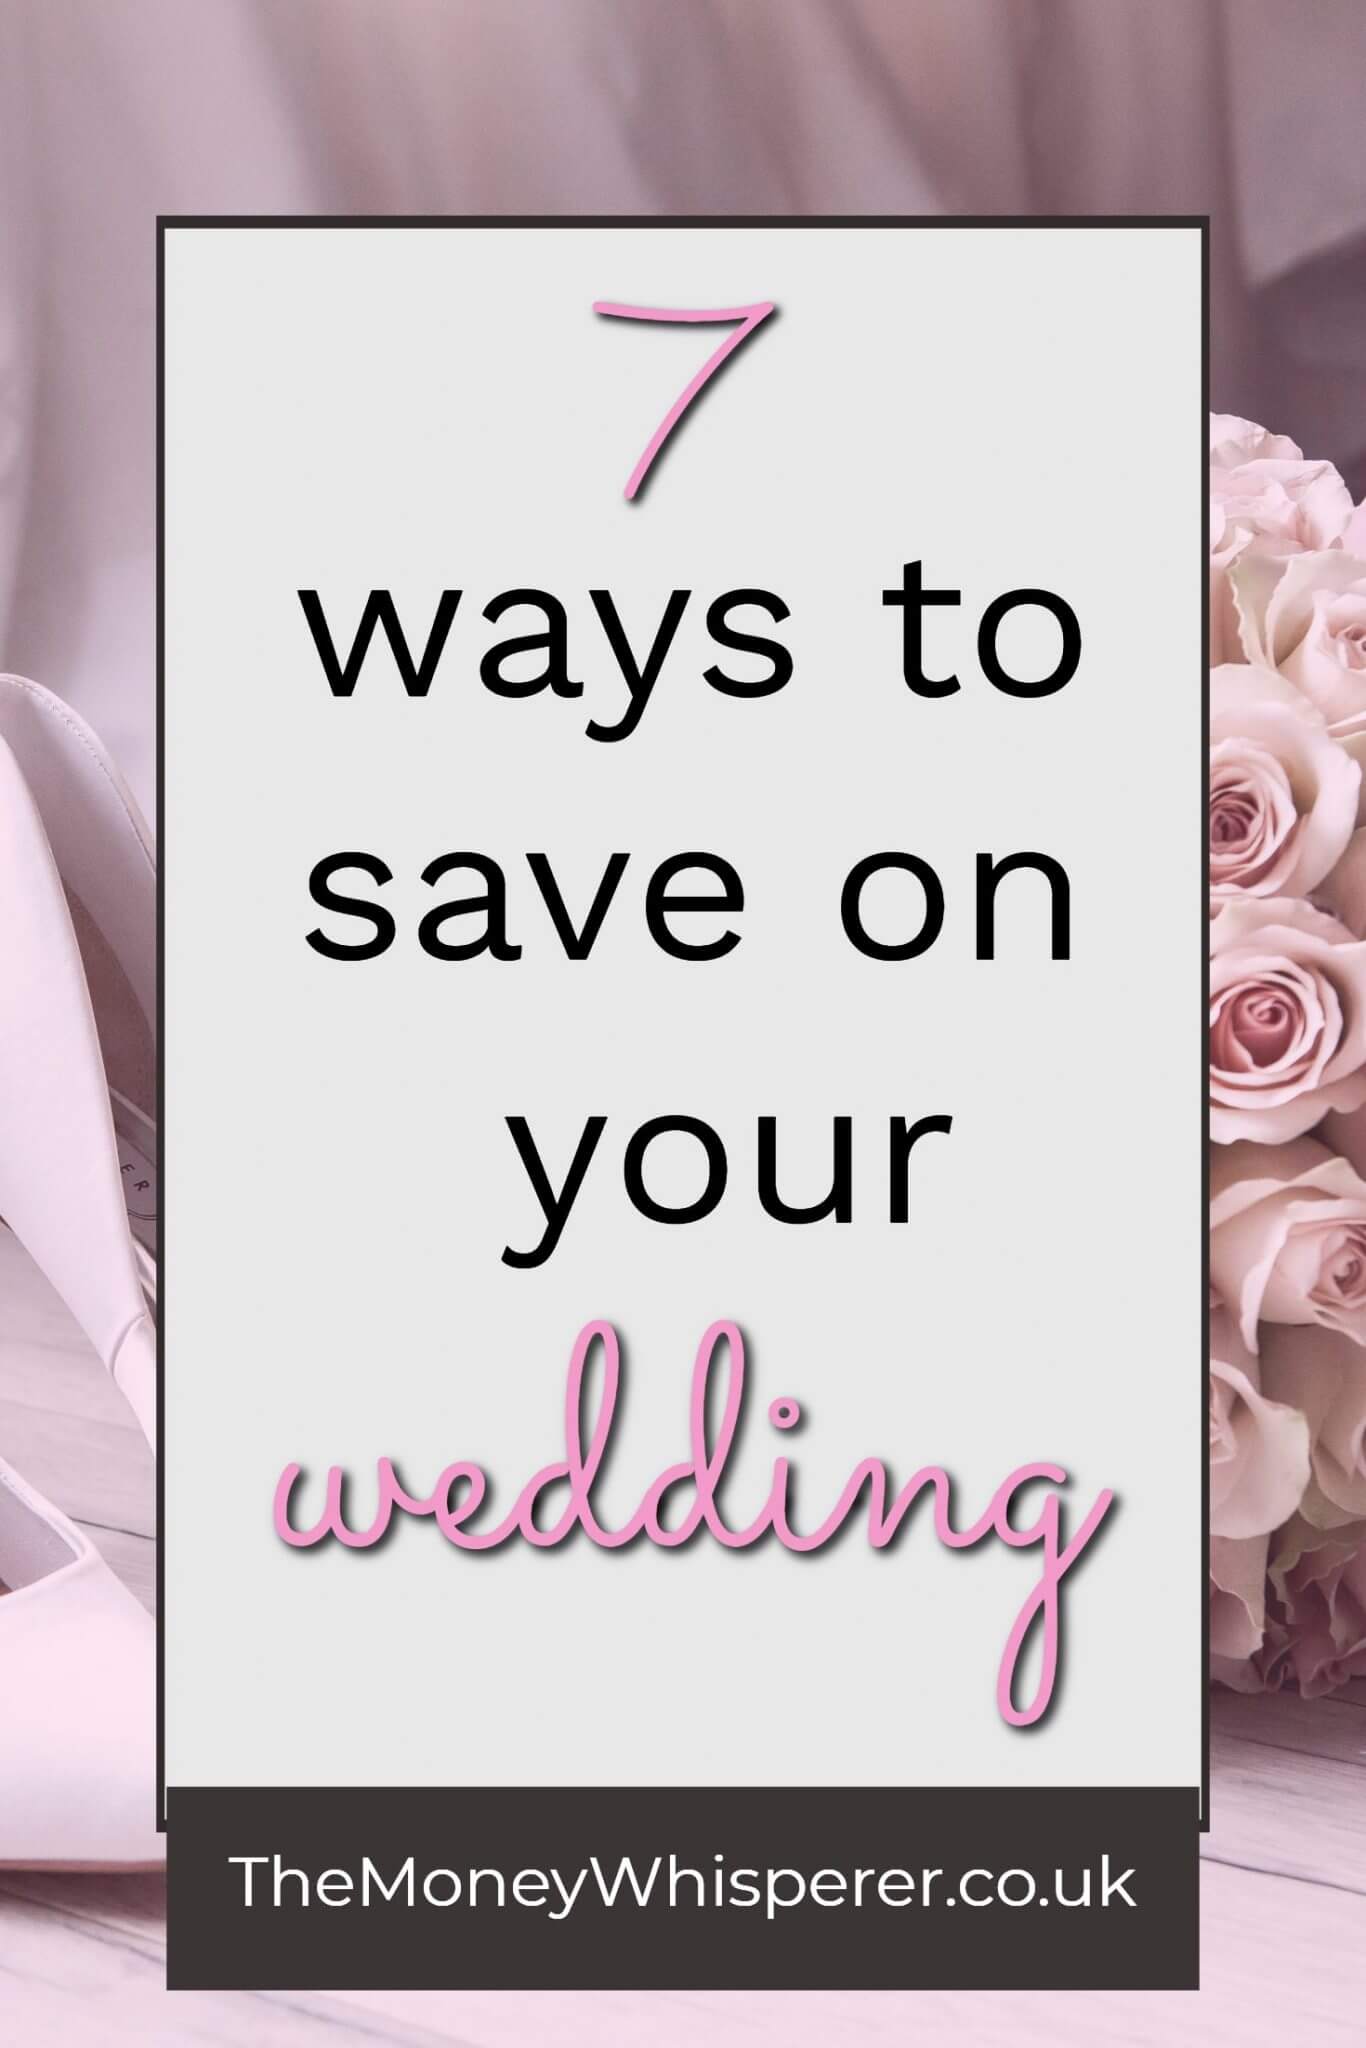 7 ways to save on your wedding - from pruning your guest list to how to re-use flowers throughout the day #wedding #savemoney